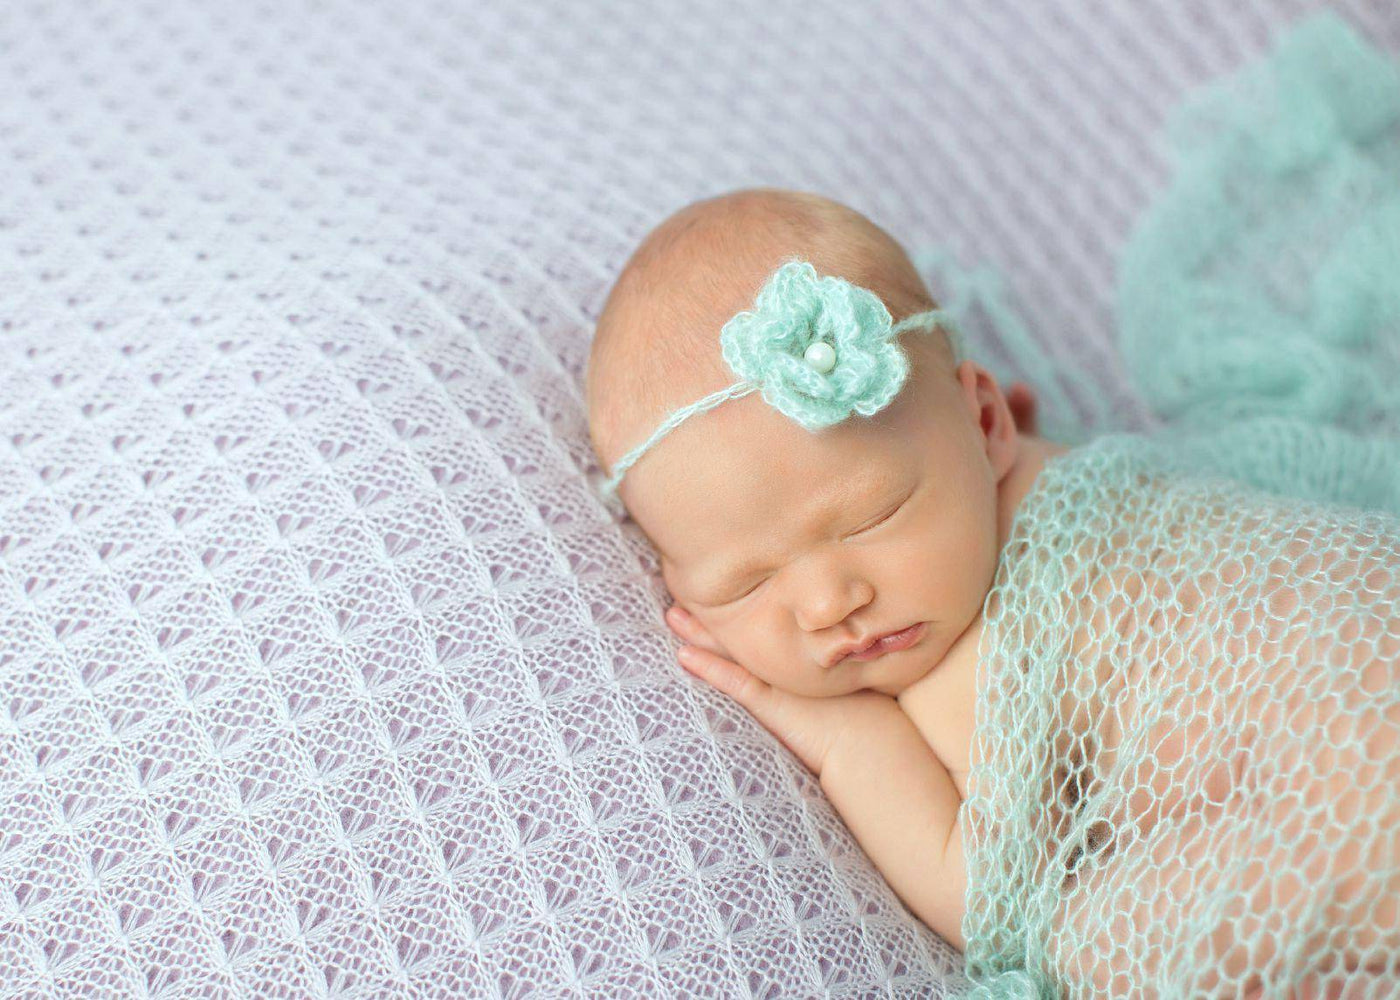 SET Baby Blue Mohair Knit Baby Wrap and Headband - Beautiful Photo Props